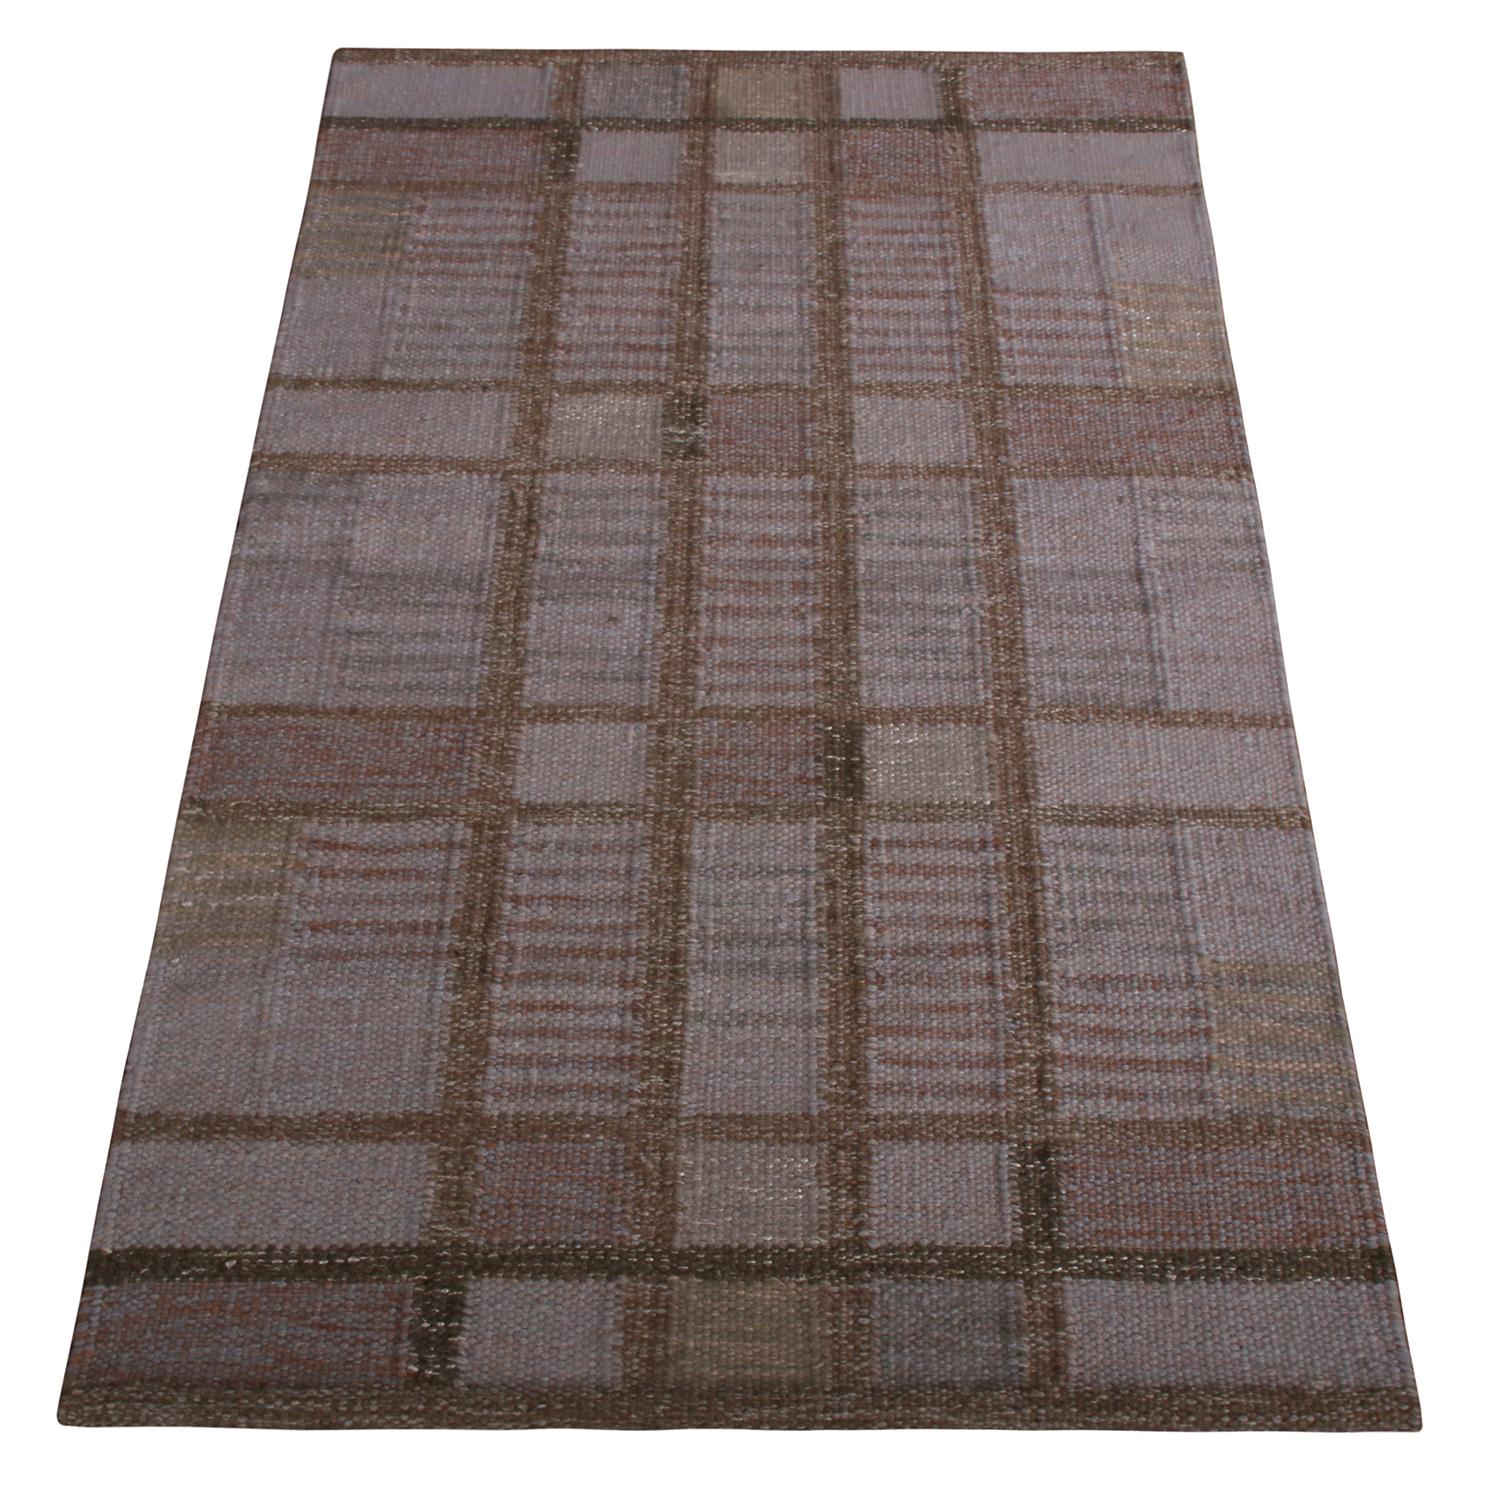 Hand woven in wool a unique blend of undyed natural yarns, this modern rug hails from the latest flat weave additions to Rug & Kilim’s Scandinavian Kilim Collection, a celebration of Swedish modernism with new large-scale geometry and exciting